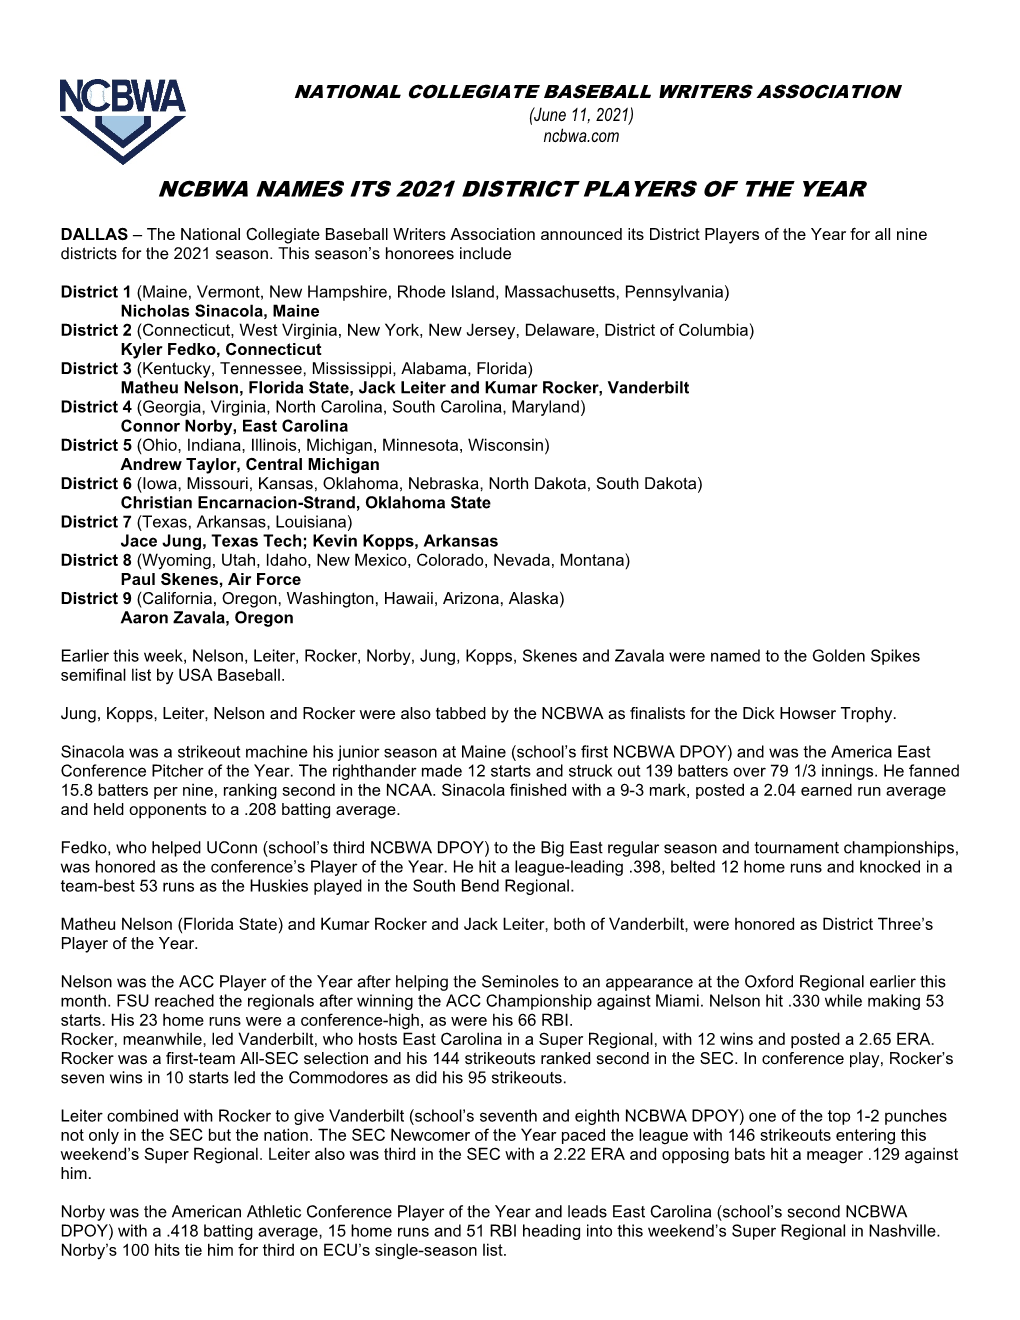 Ncbwa Names Its 2021 District Players of the Year